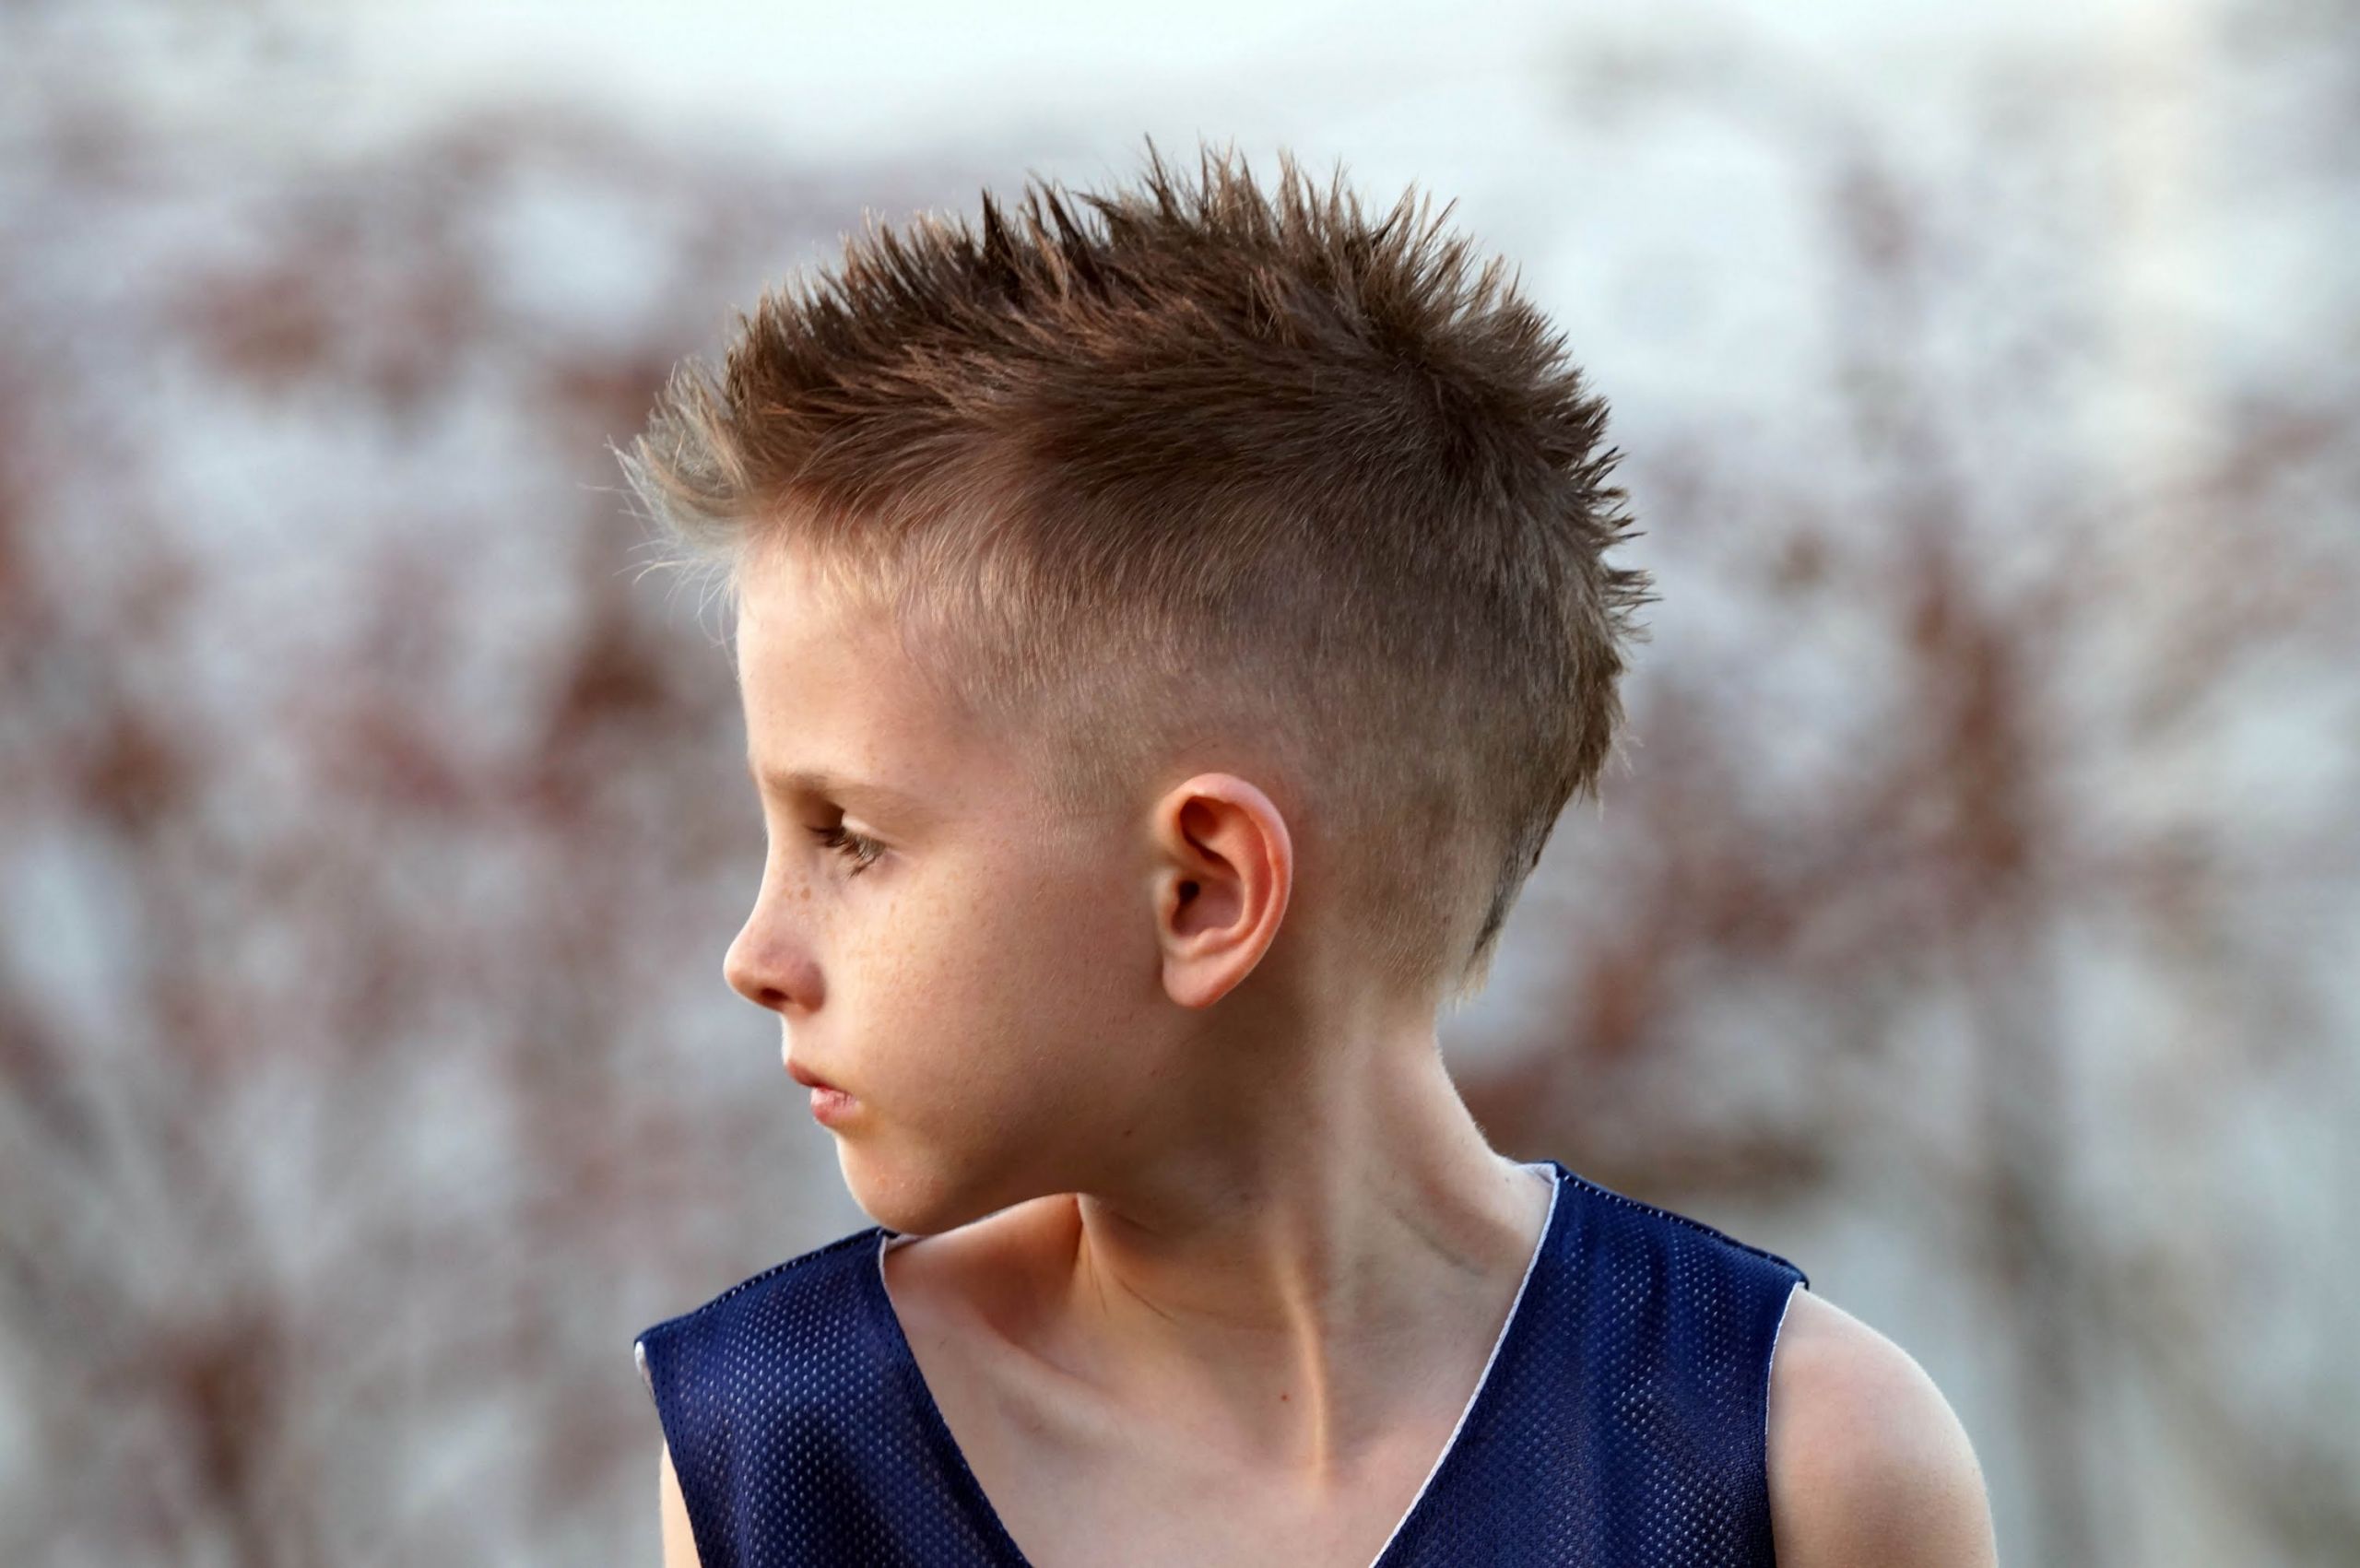 Mohawk Hairstyle For Kids
 Learn How to Do a Mohawk Hairstyle